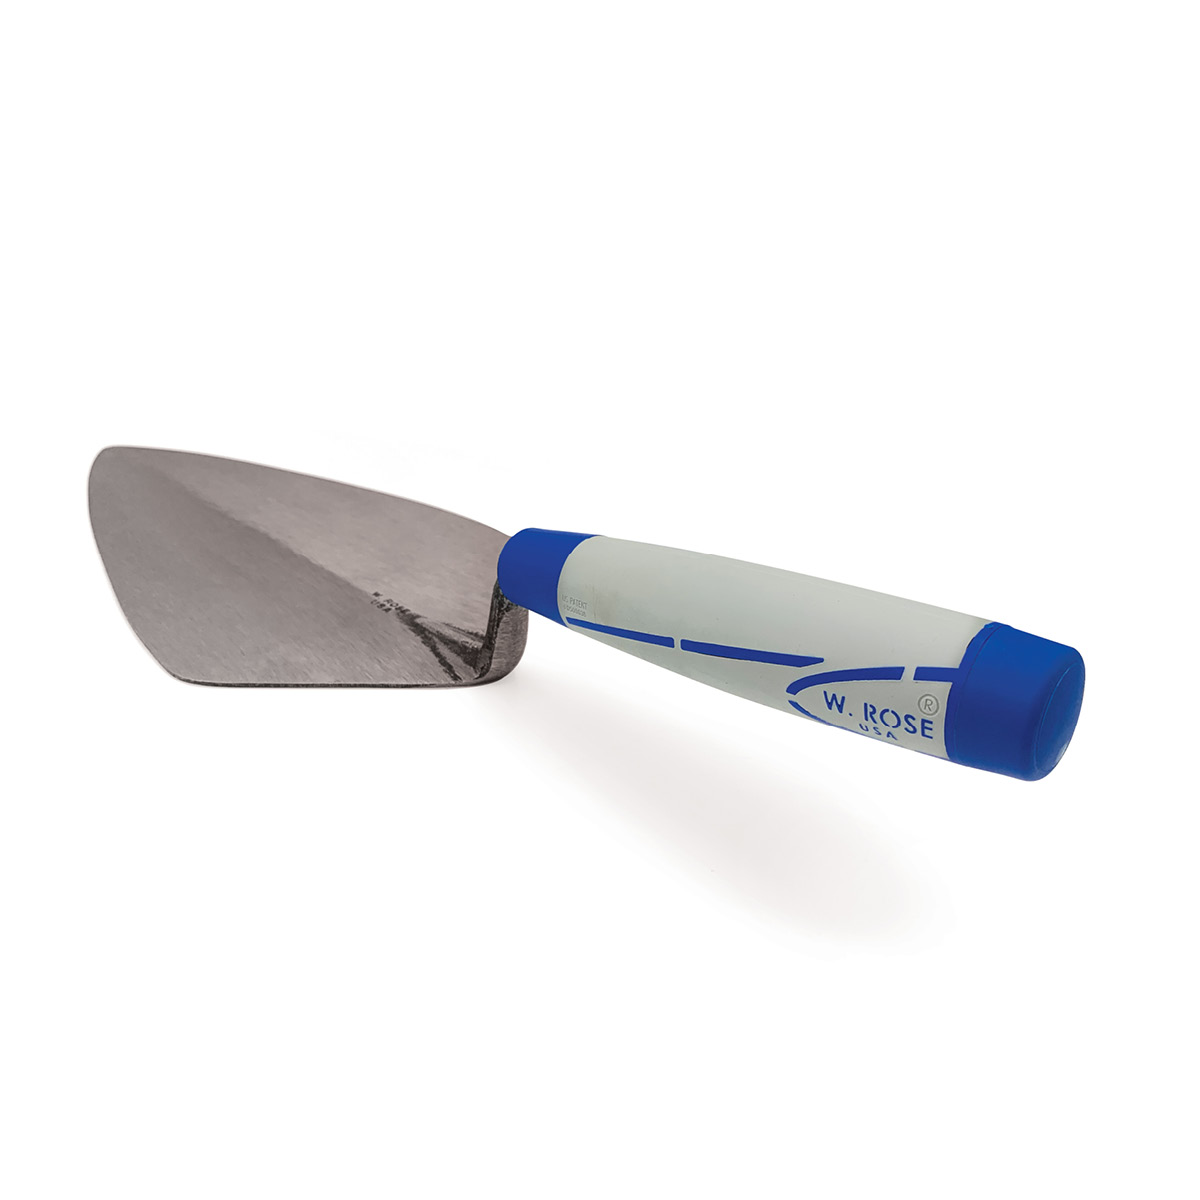 W.rose London narrow trowels are masonry professional standard brick trowels made from a single piece of forged steel. Available in the United Kingdom via Speedcrete.